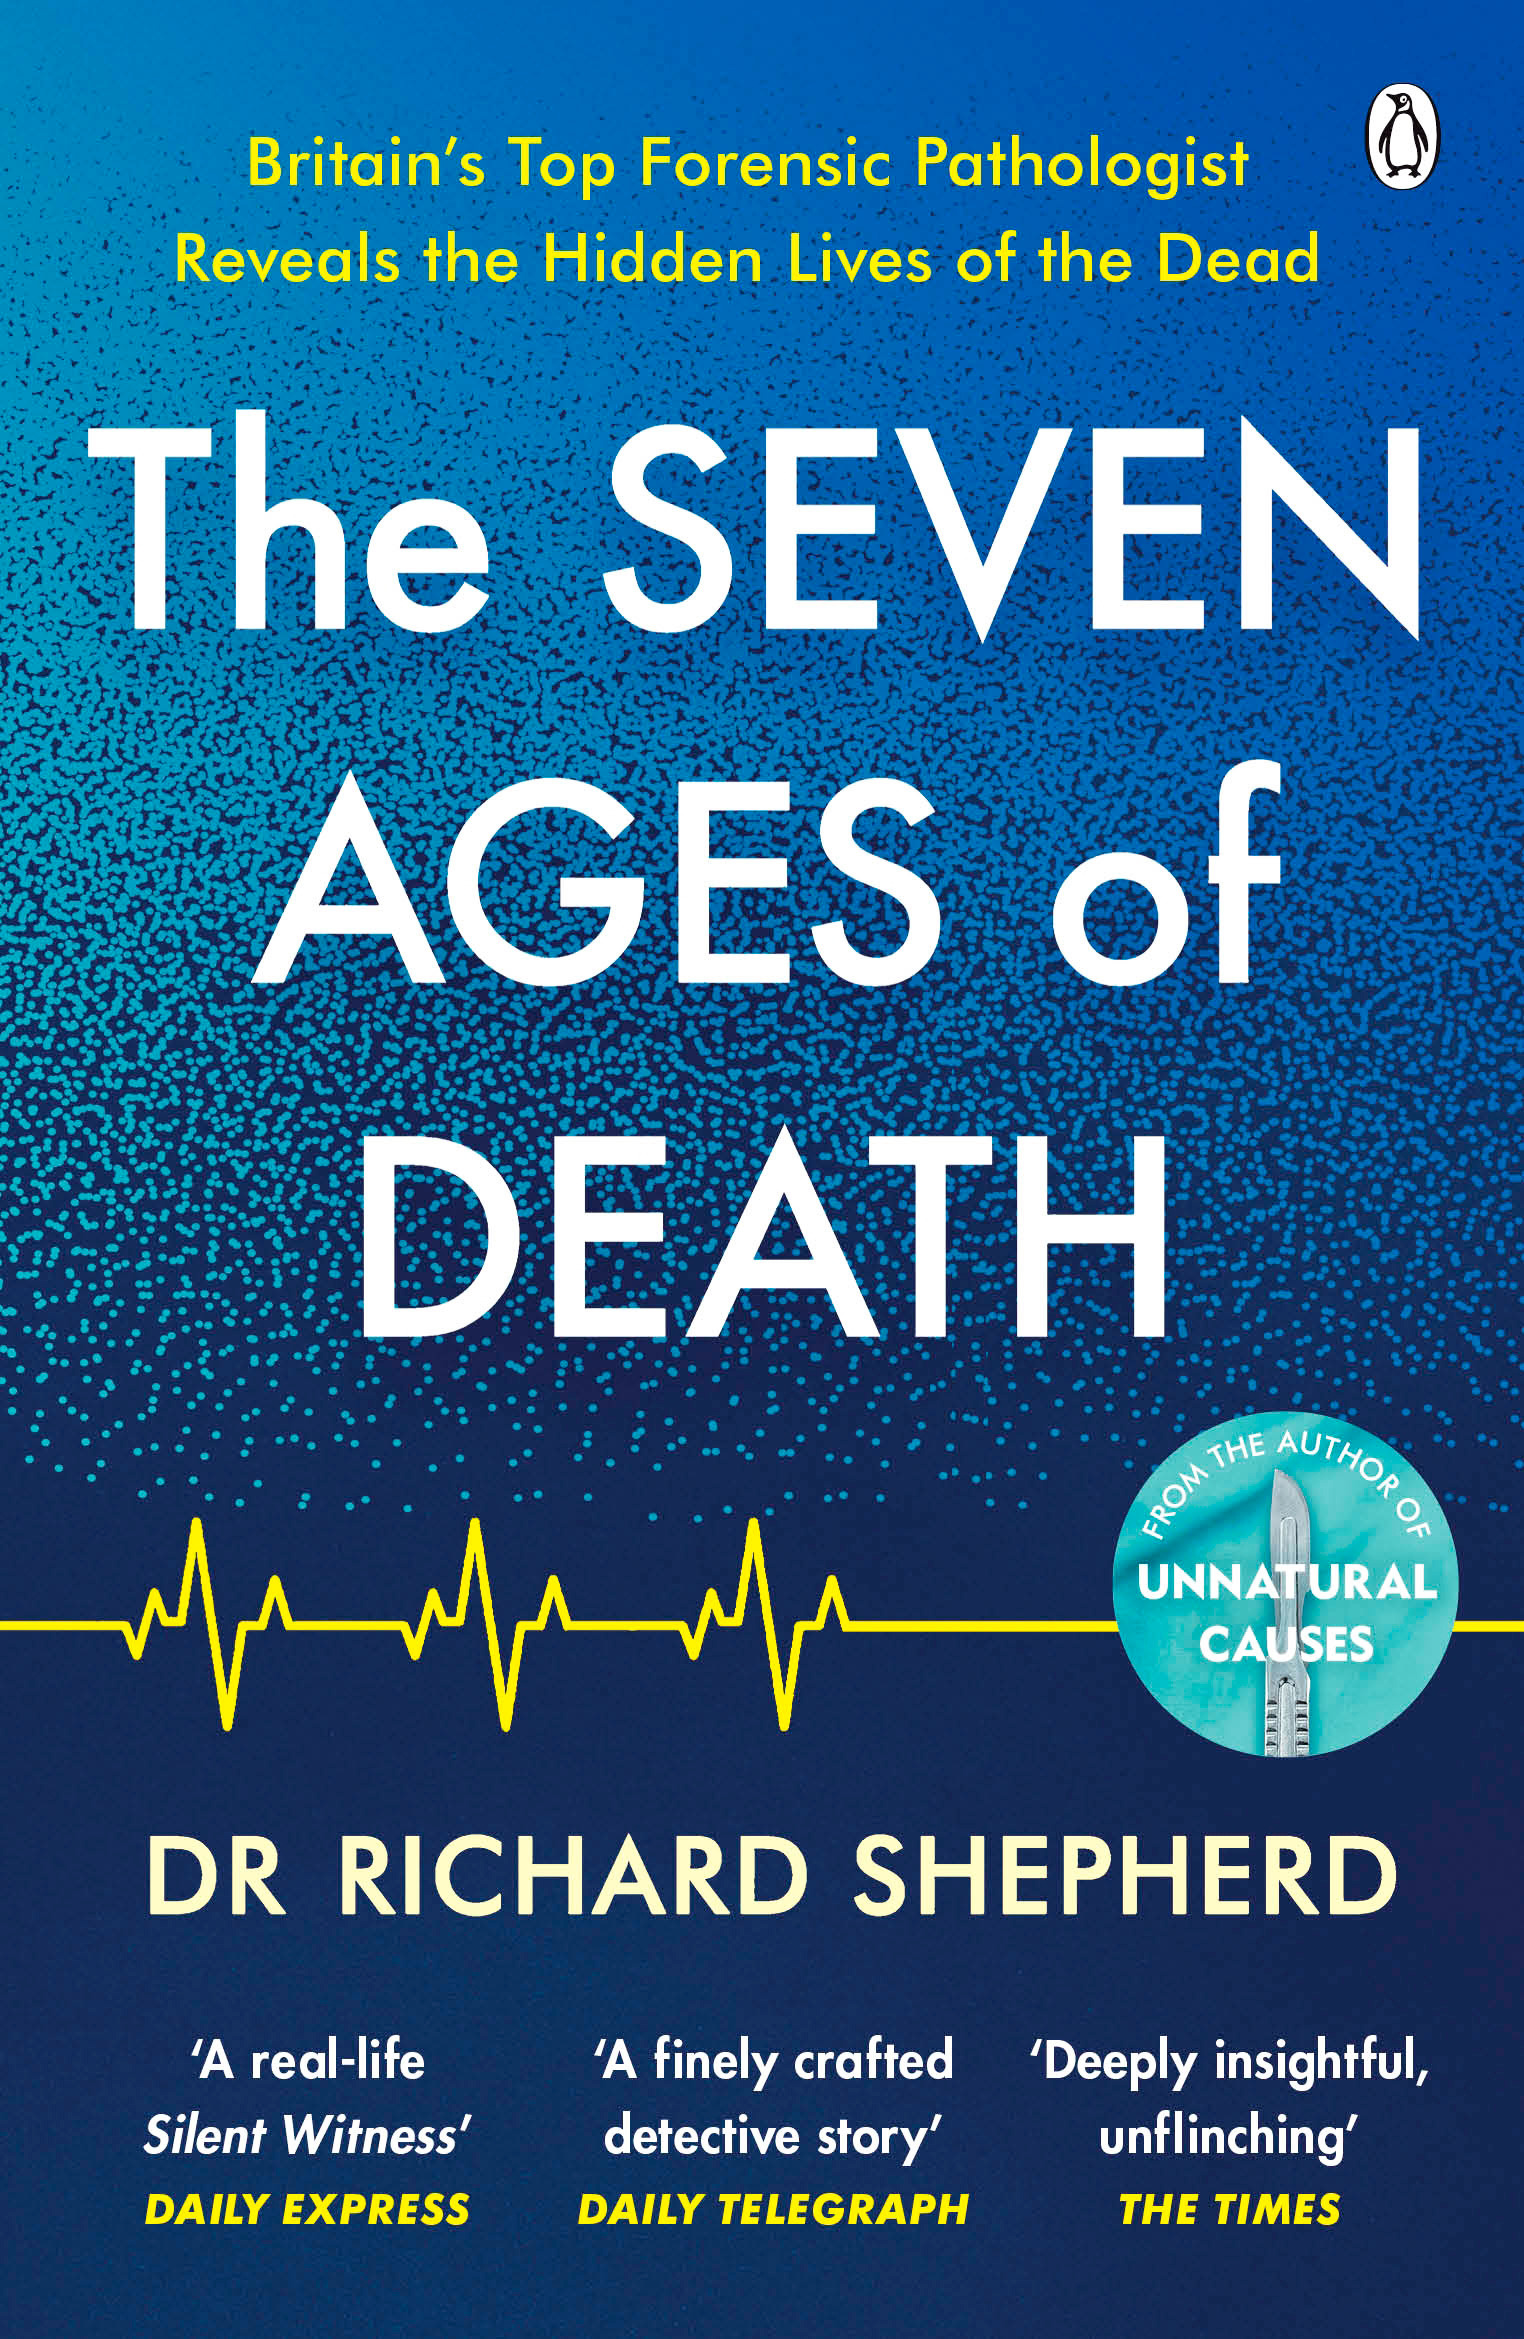 The Seven Ages of Death : A Forensic Pathologist's Journey Through Life | Biography & Memoir